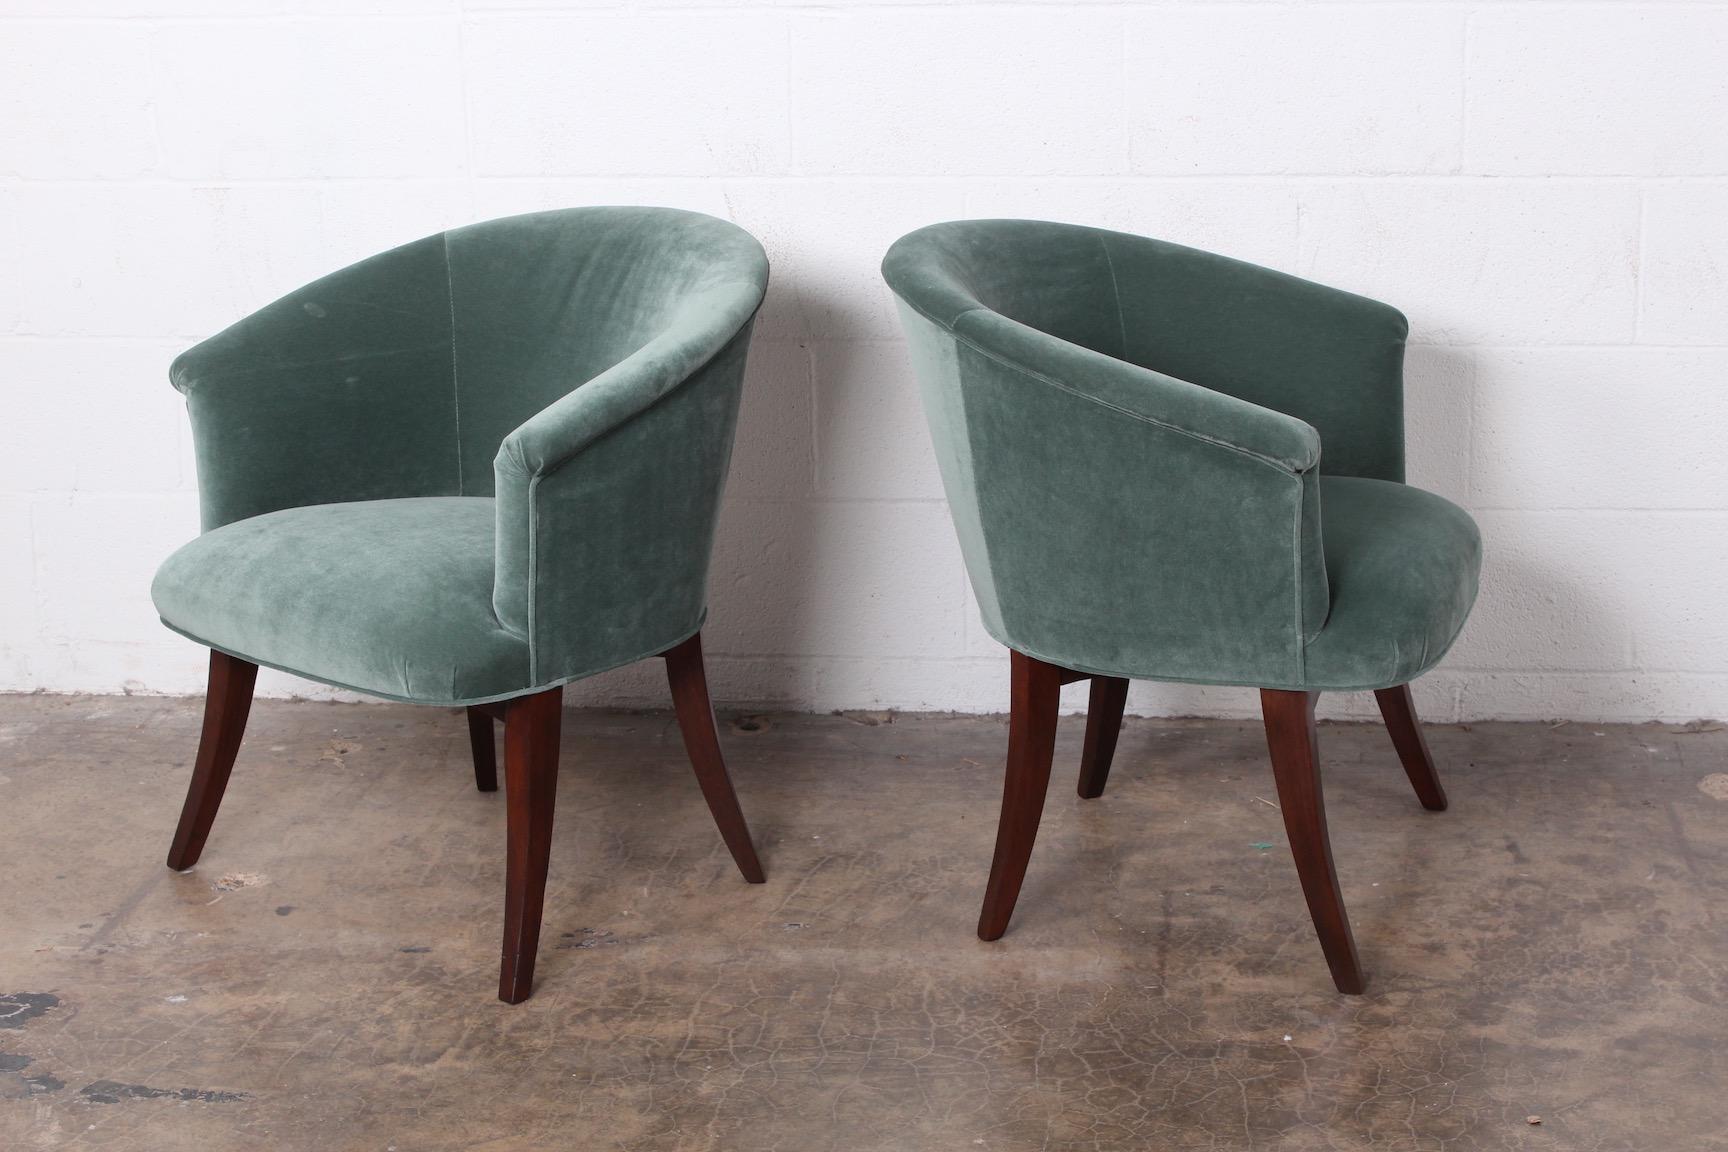 A pair of armchairs designed by Edward Wormley for Dunbar.